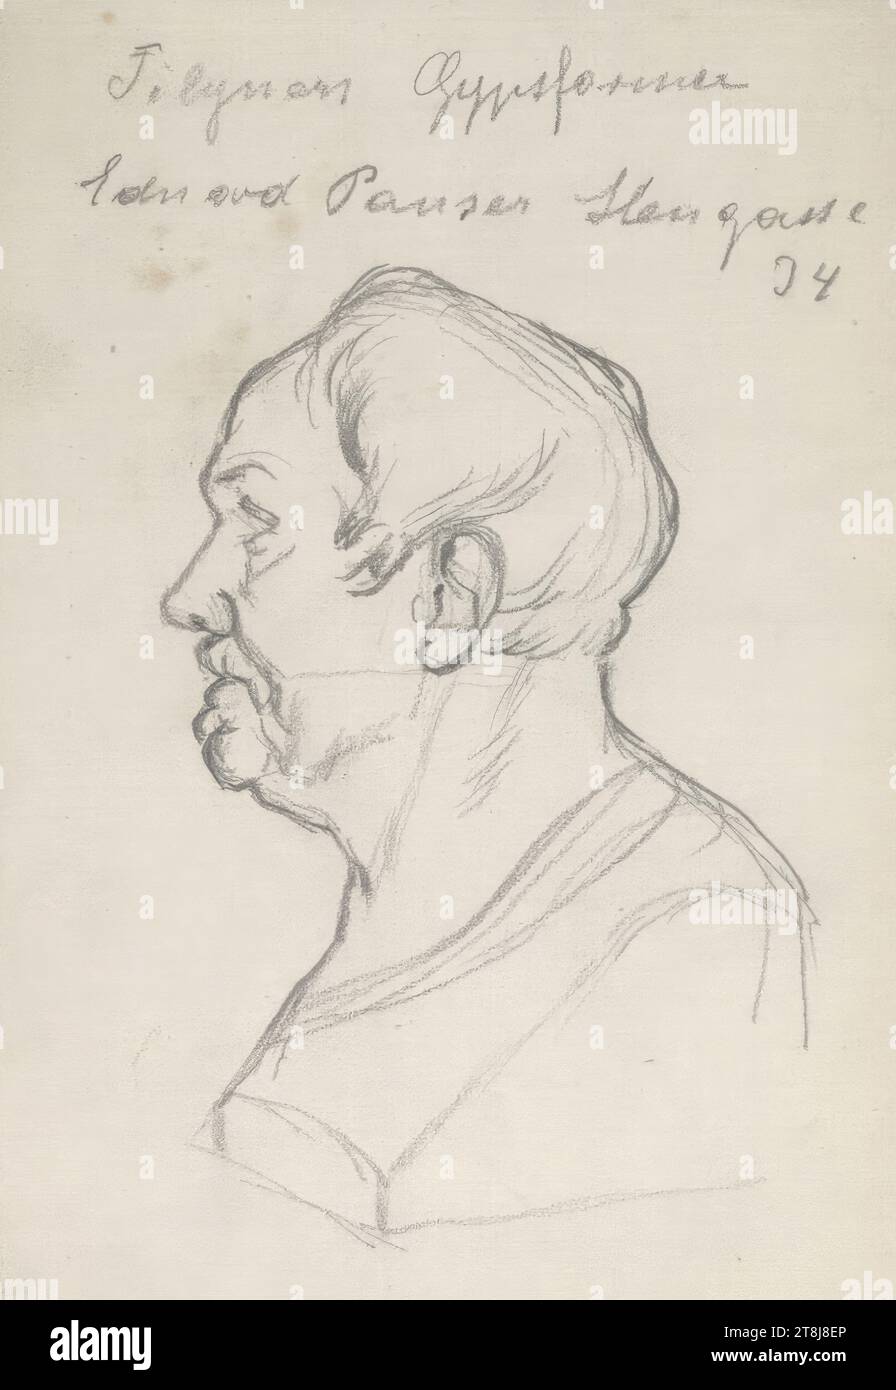 Sketch of a plaster bust in profile, sketchbook Swoboda Emerich Alexius; 54 paginated pages, page 51 is missing, and 4 pasted drawings, on pages 53a-53d, Emerich Alexius Swoboda, Enzenreith-Wörth 1849 - 1920 Vienna, 1892, drawing, pencil, sheet: 17 x 11.1 cm, M.o. 'Fil... Gypsformer / Eduard Pauser Heugasse / 34', pencil, Austria Stock Photo